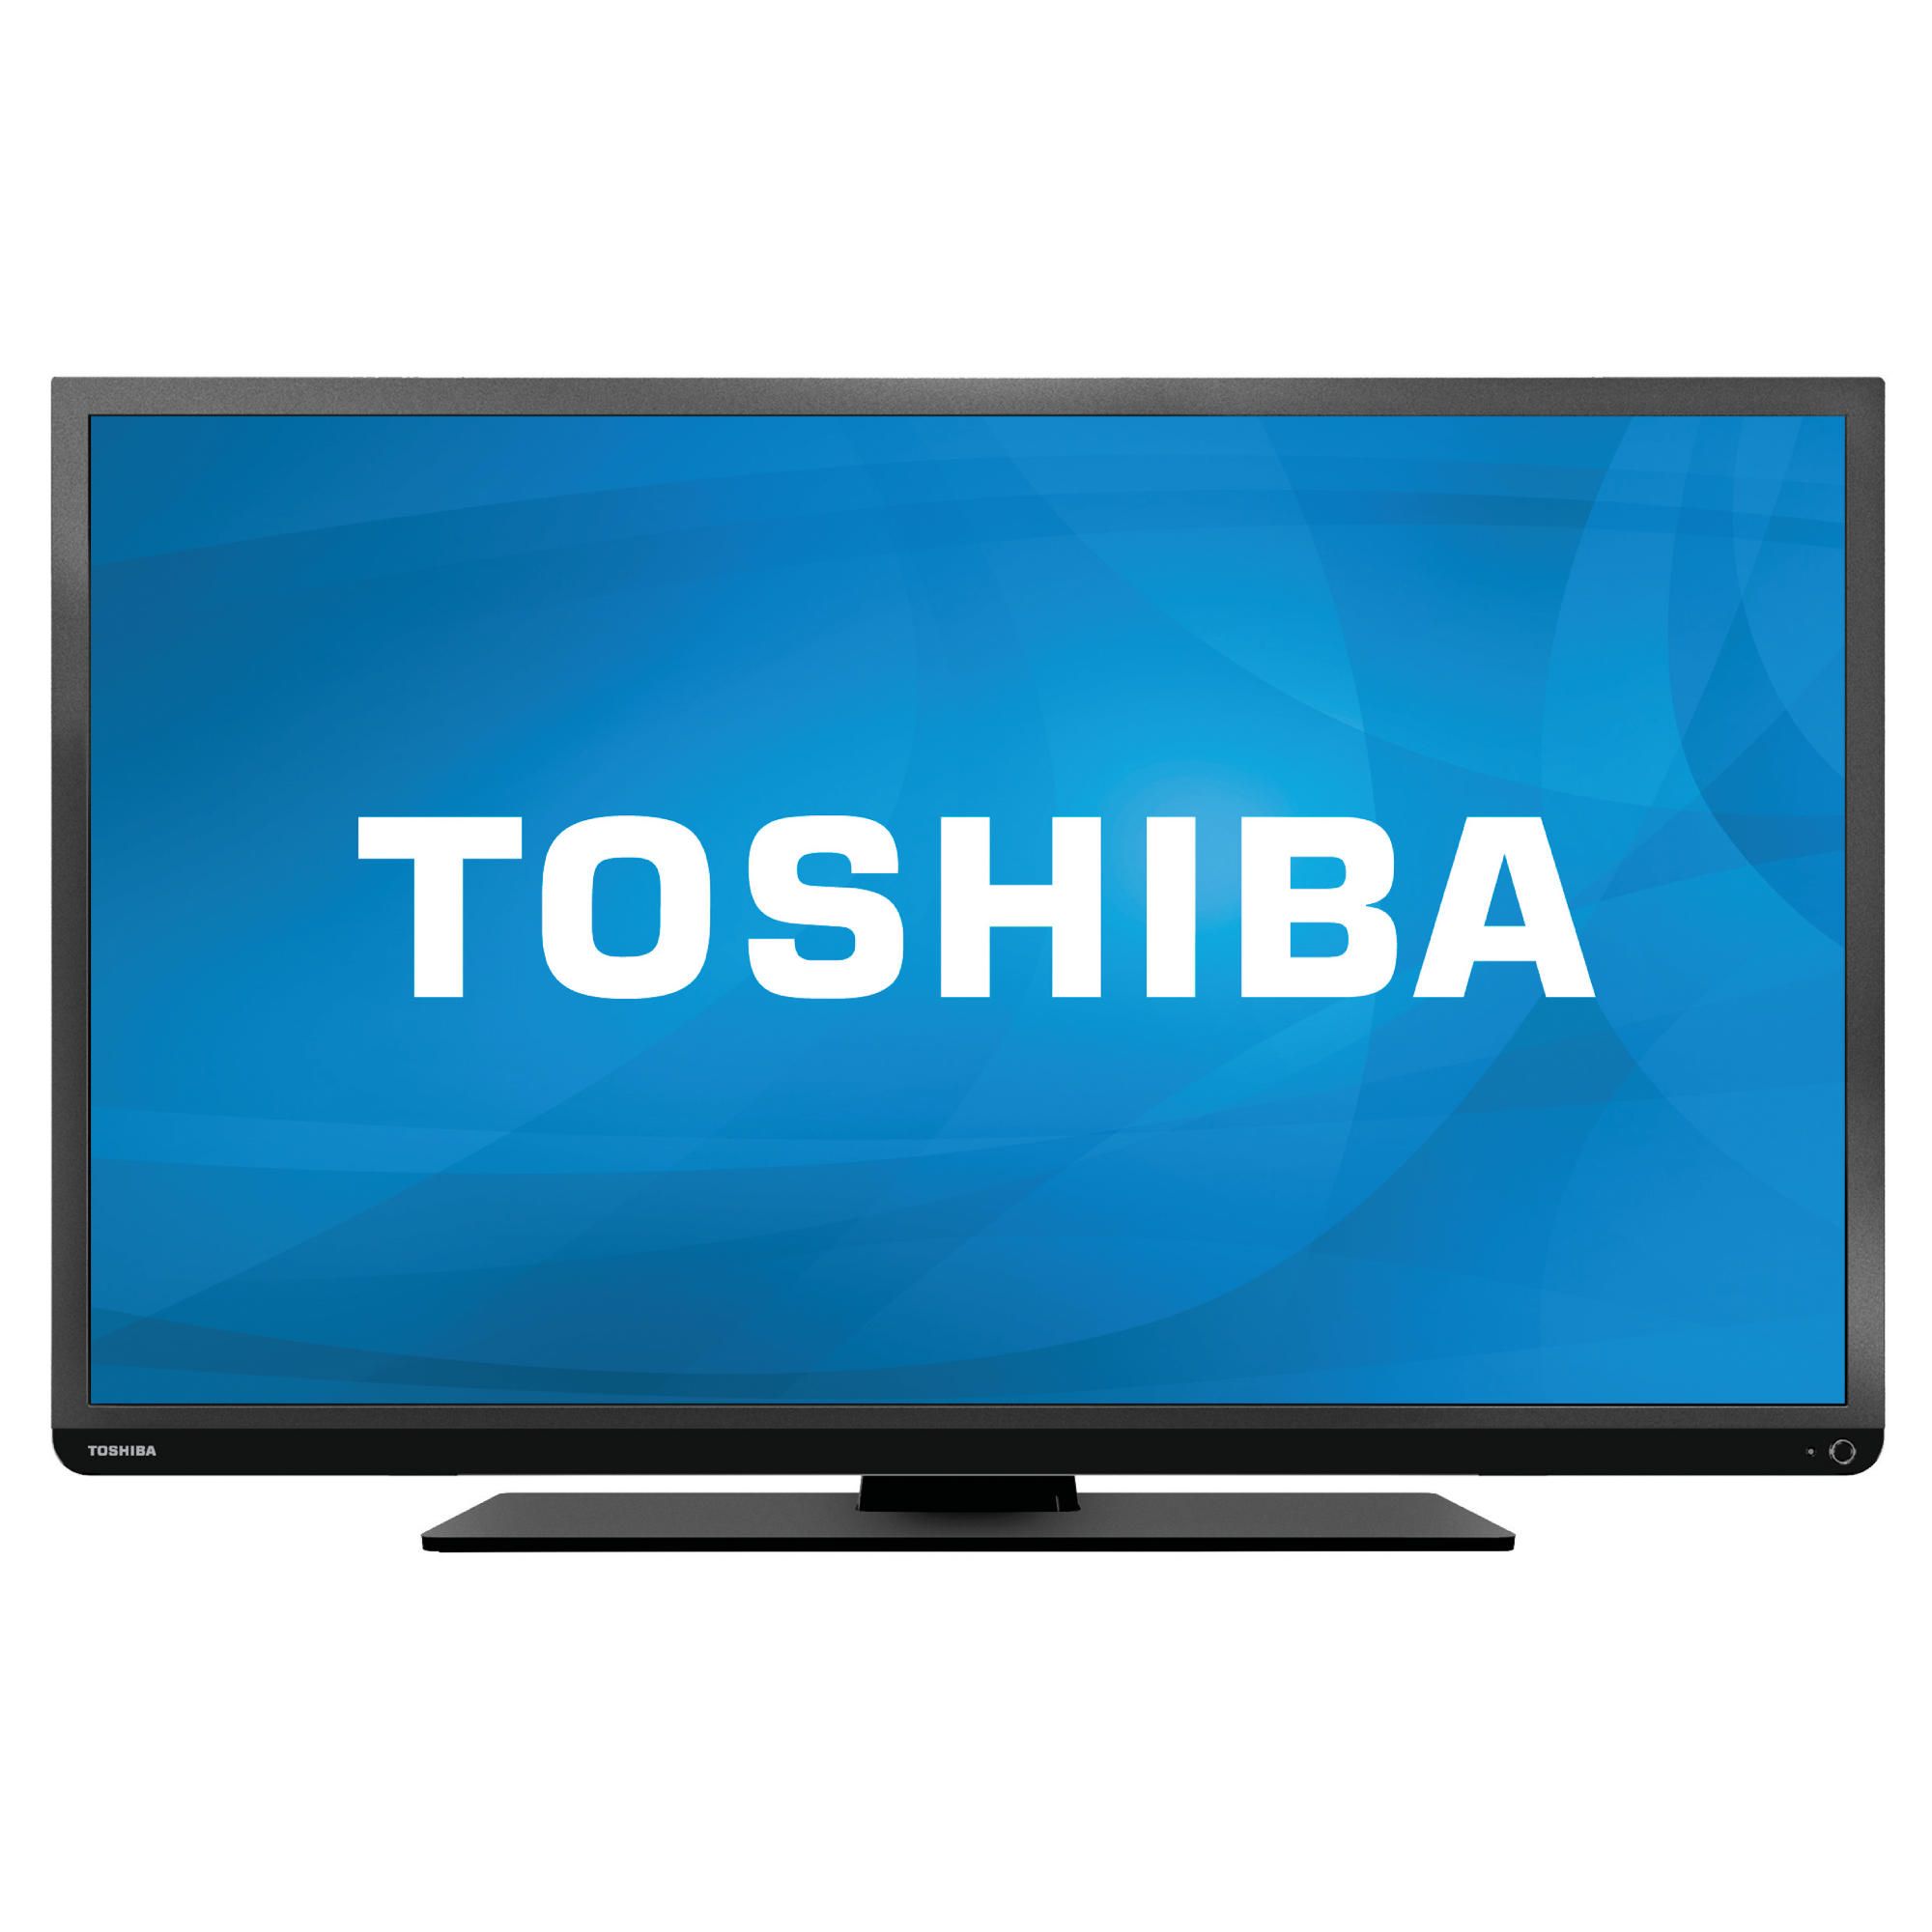 Toshiba 40L1333B 40 inch Full HD 1080p LED backlit TV with Freeview